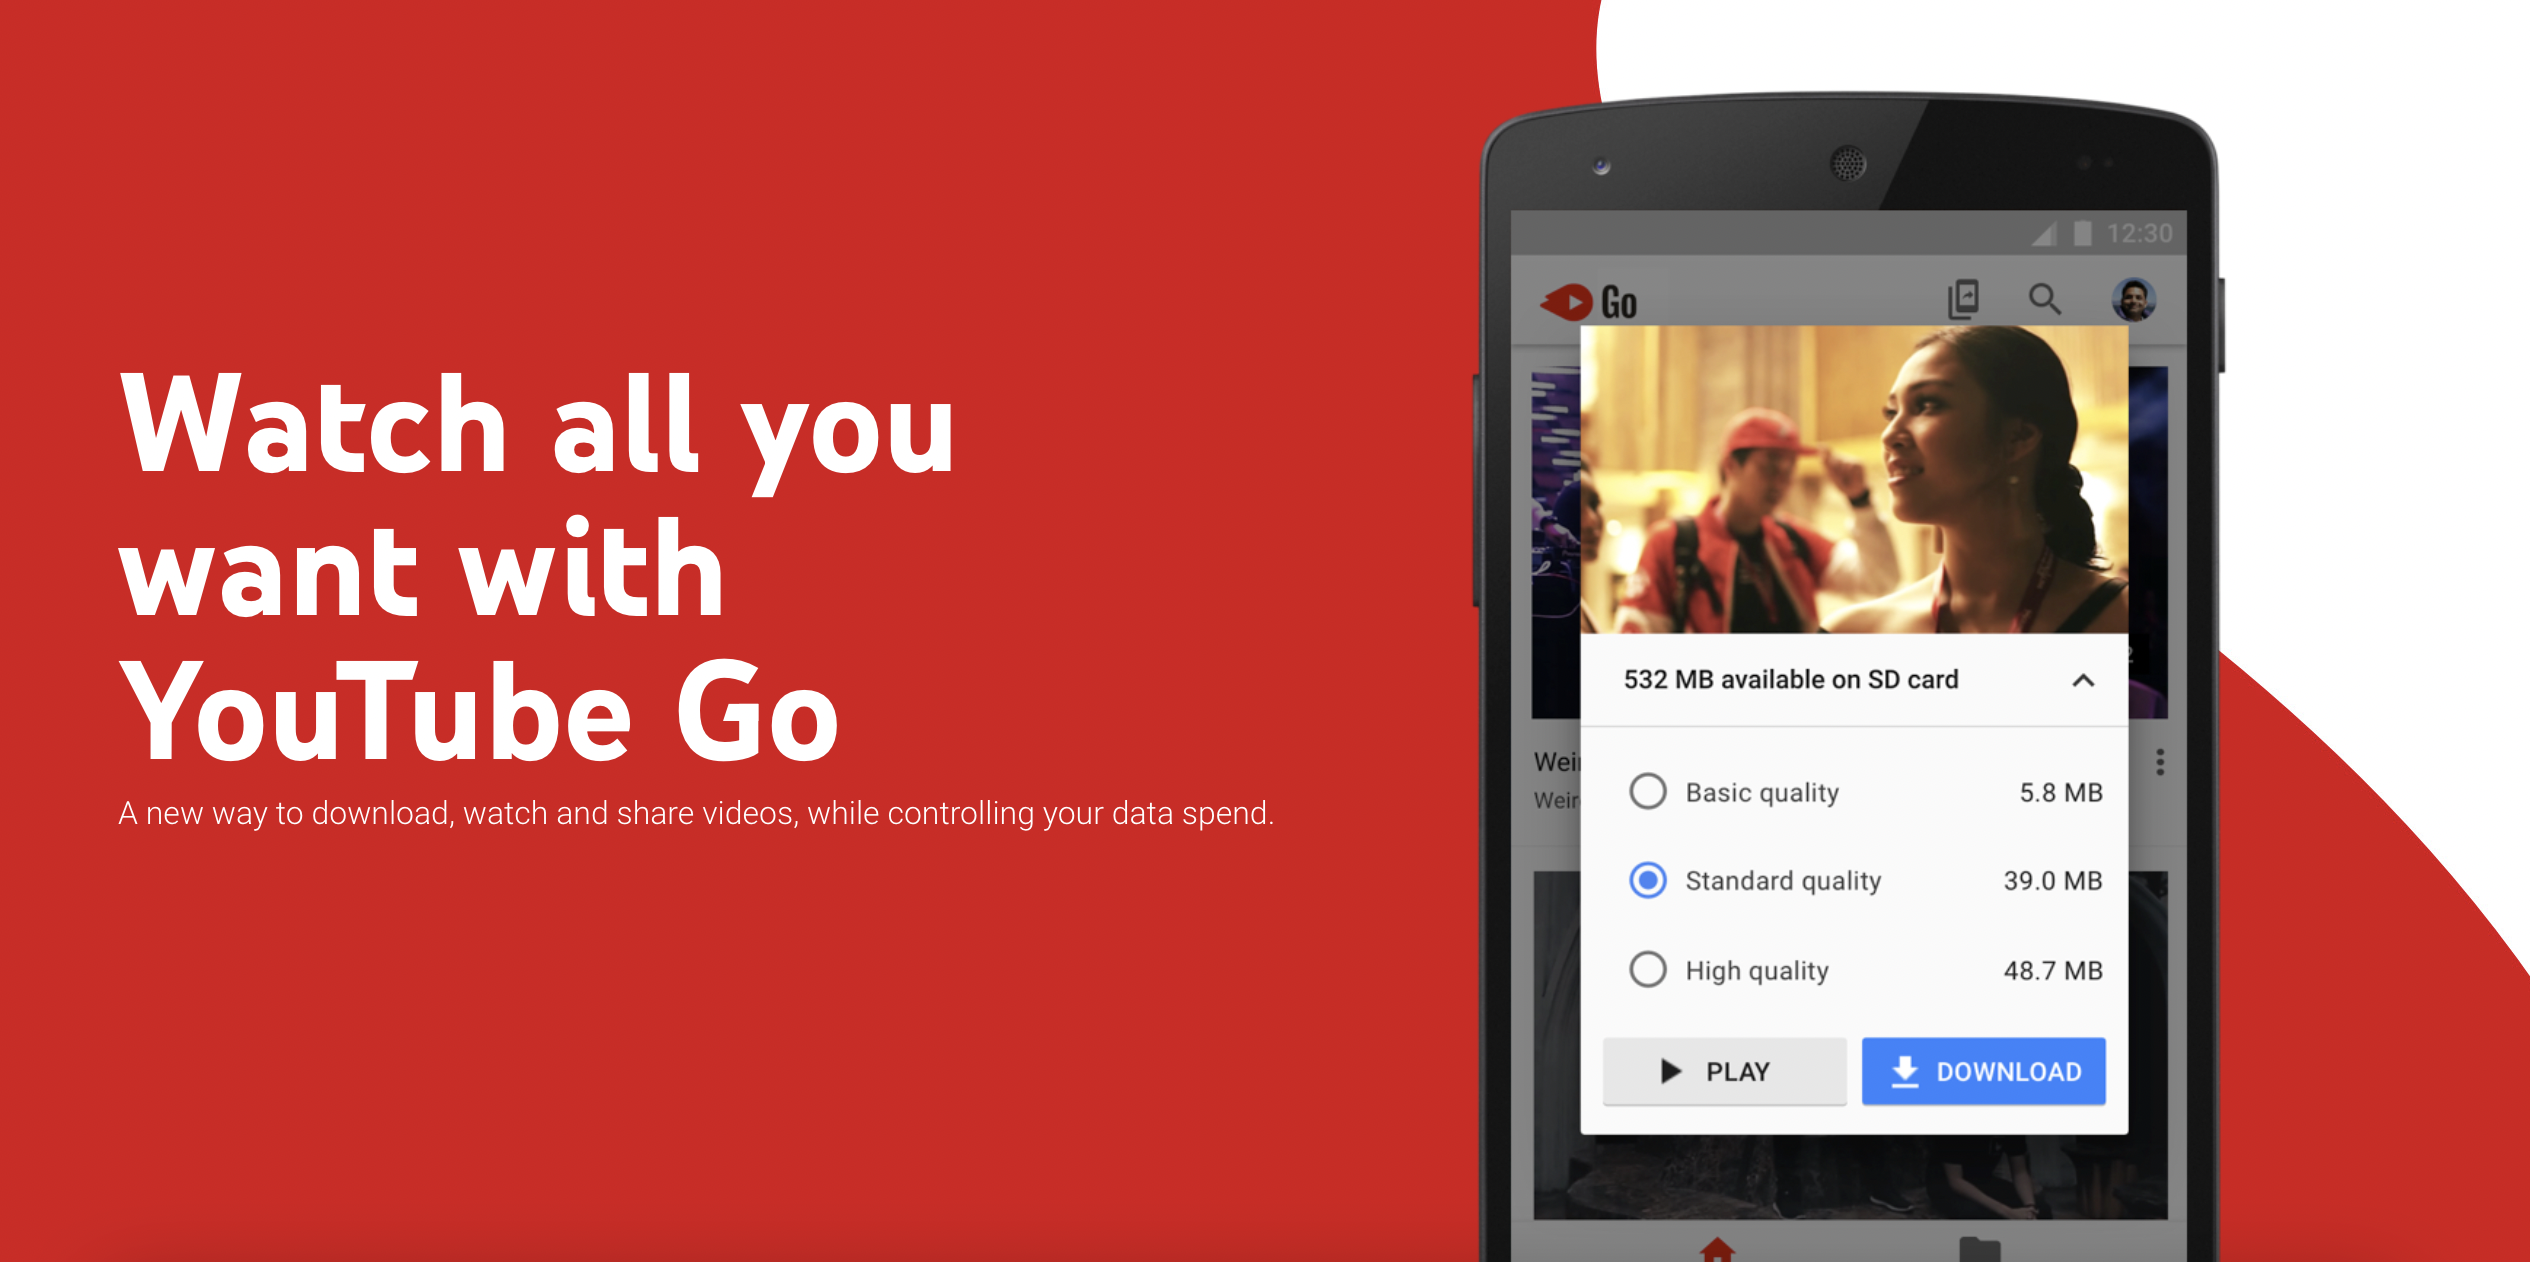 YouTube Go is shutting down in August - Crast.net